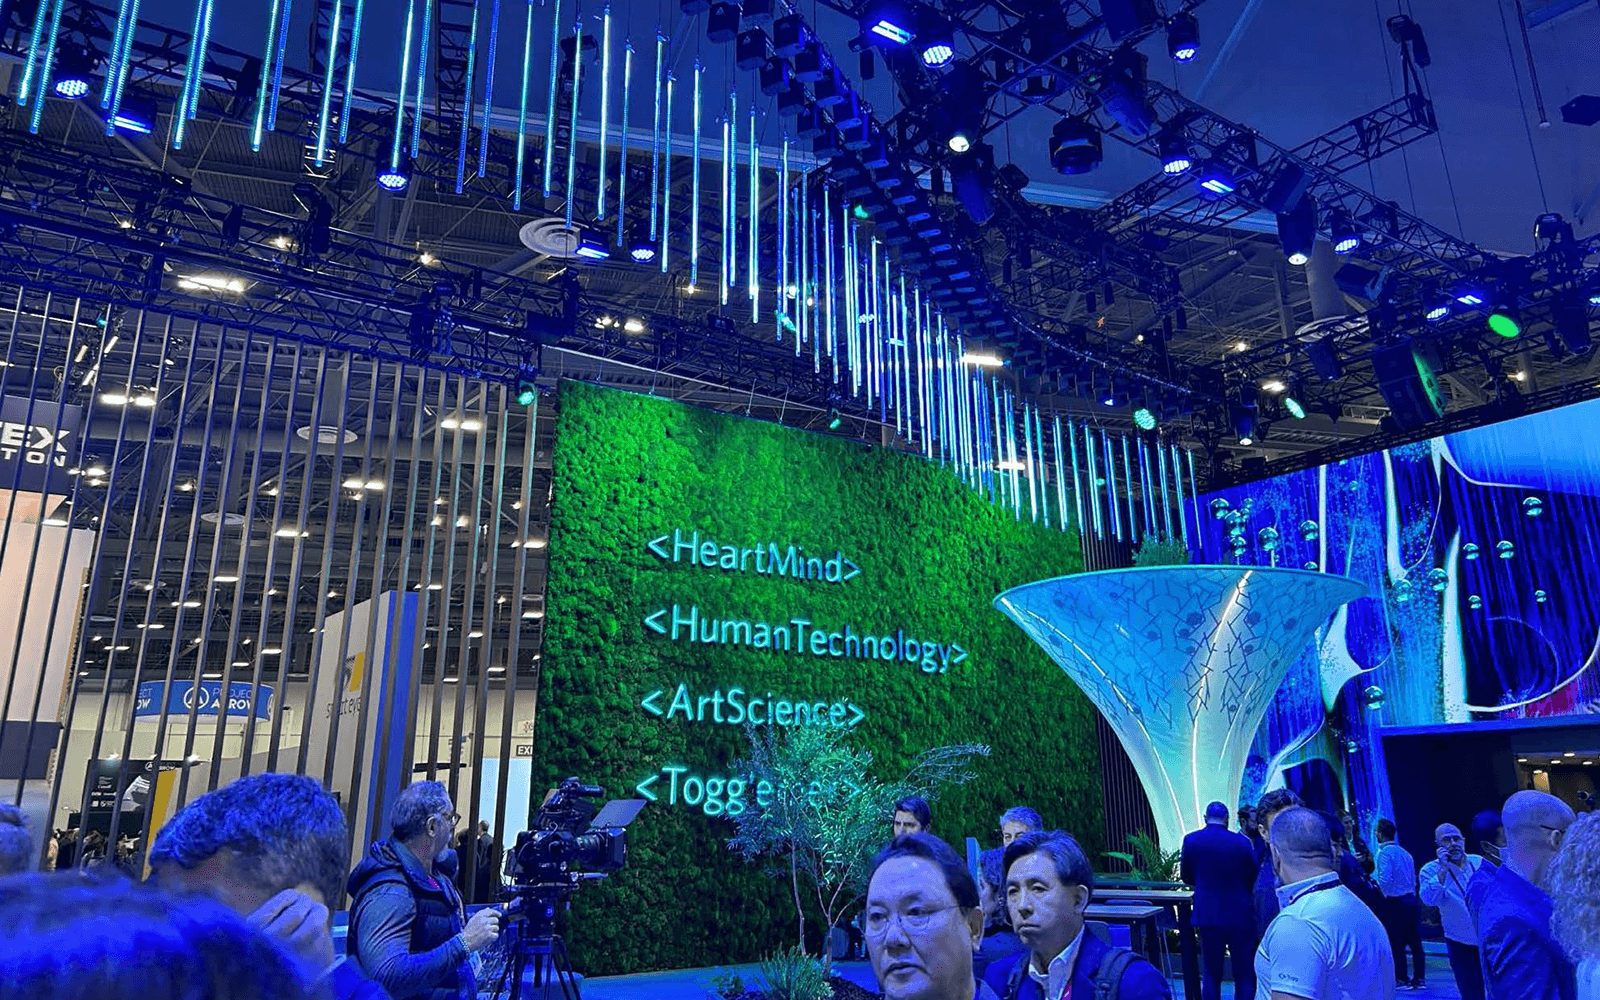 A greenery wall in the entrance to the Togg booth.